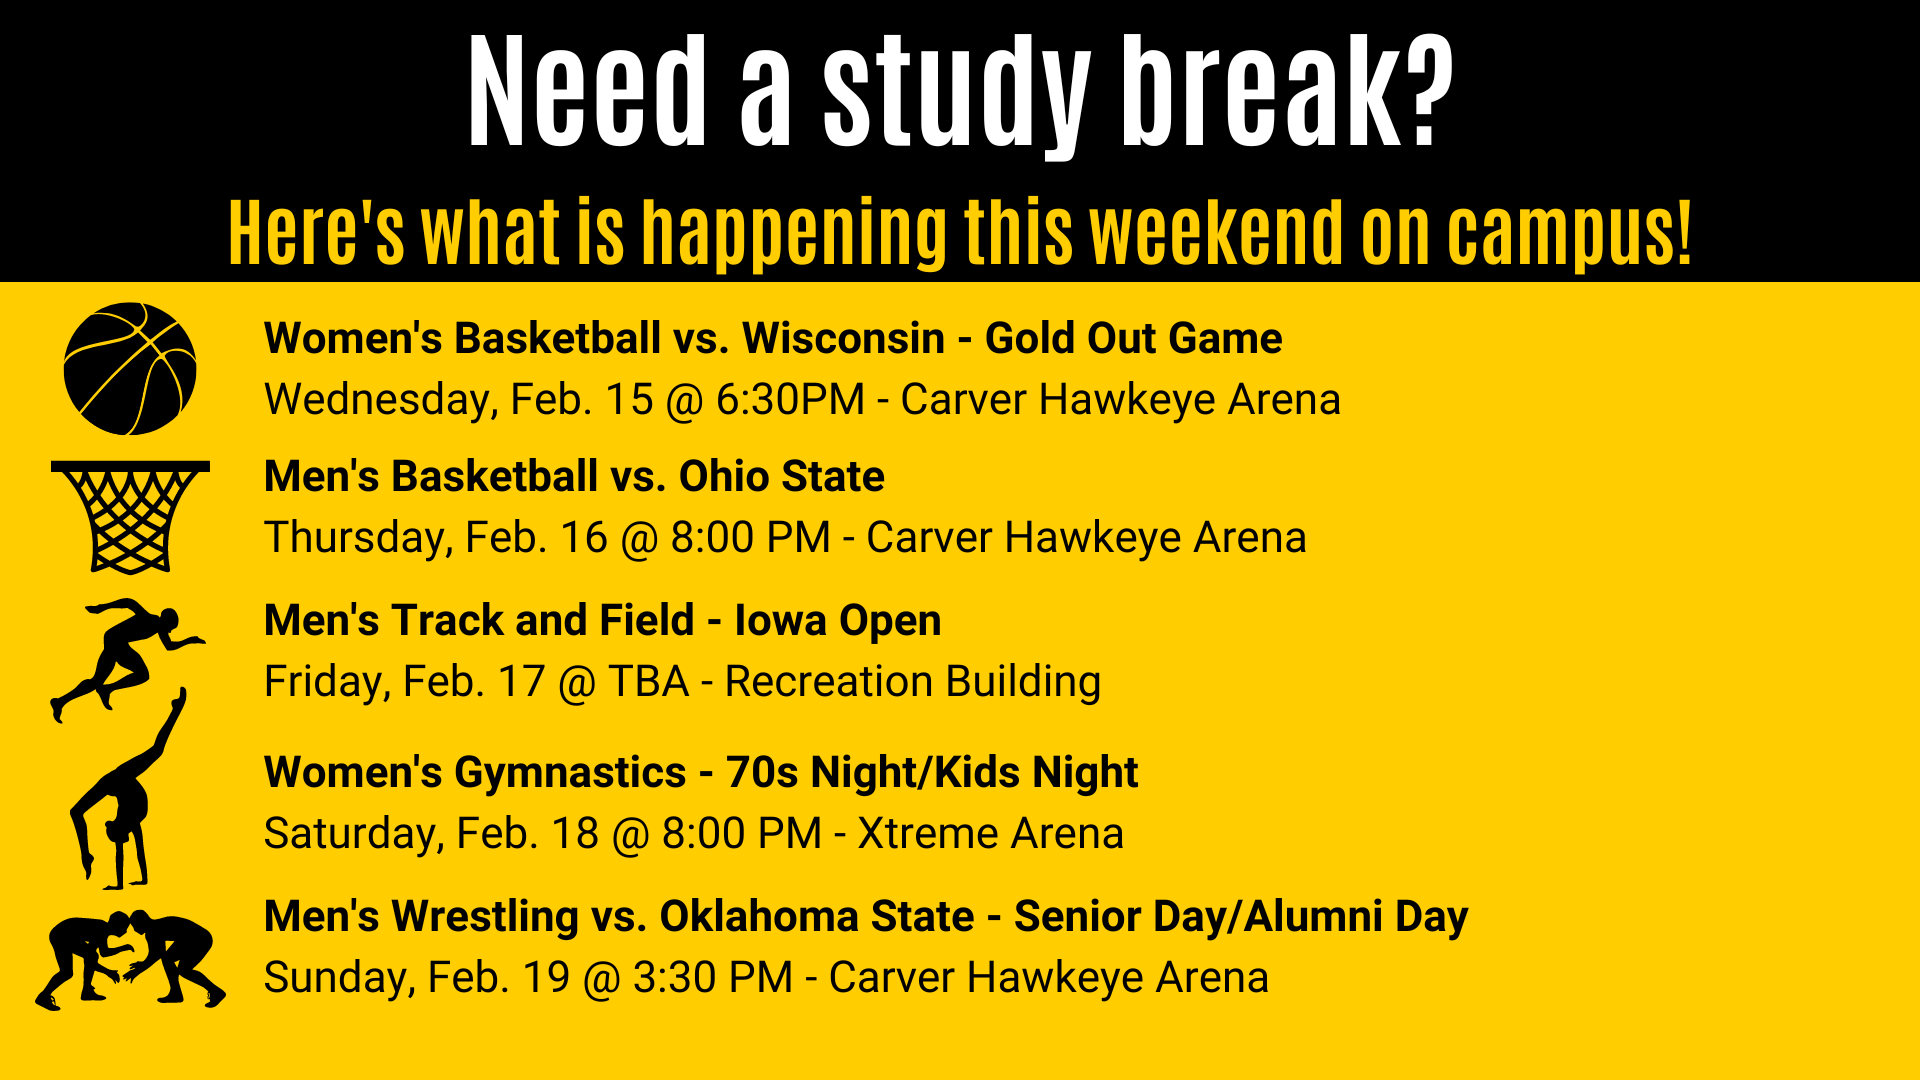 Men's Basketball vs. Ohio State Thursday, Feb. 16 @ 8:00 PM - Carver Hawkeye Arena Women's Basketball vs. Wisconsin - Gold Out Game Wednesday, Feb. 15 @ 6:30PM - Carver Hawkeye Arena Need a study break? Here's what is happening this weekend on campus! Men's Track and Field - Iowa Open Friday, Feb. 17 @ TBA - Recreation Building Women's Gymnastics - 70s Night/Kids Night Saturday, Feb. 18 @ 8:00 PM - Xtreme Arena Men's Wrestling vs. Oklahoma State - Senior Day/Alumni Day Sunday, Feb. 19 @ 3:30 PM - Carver Hawkeye Arena